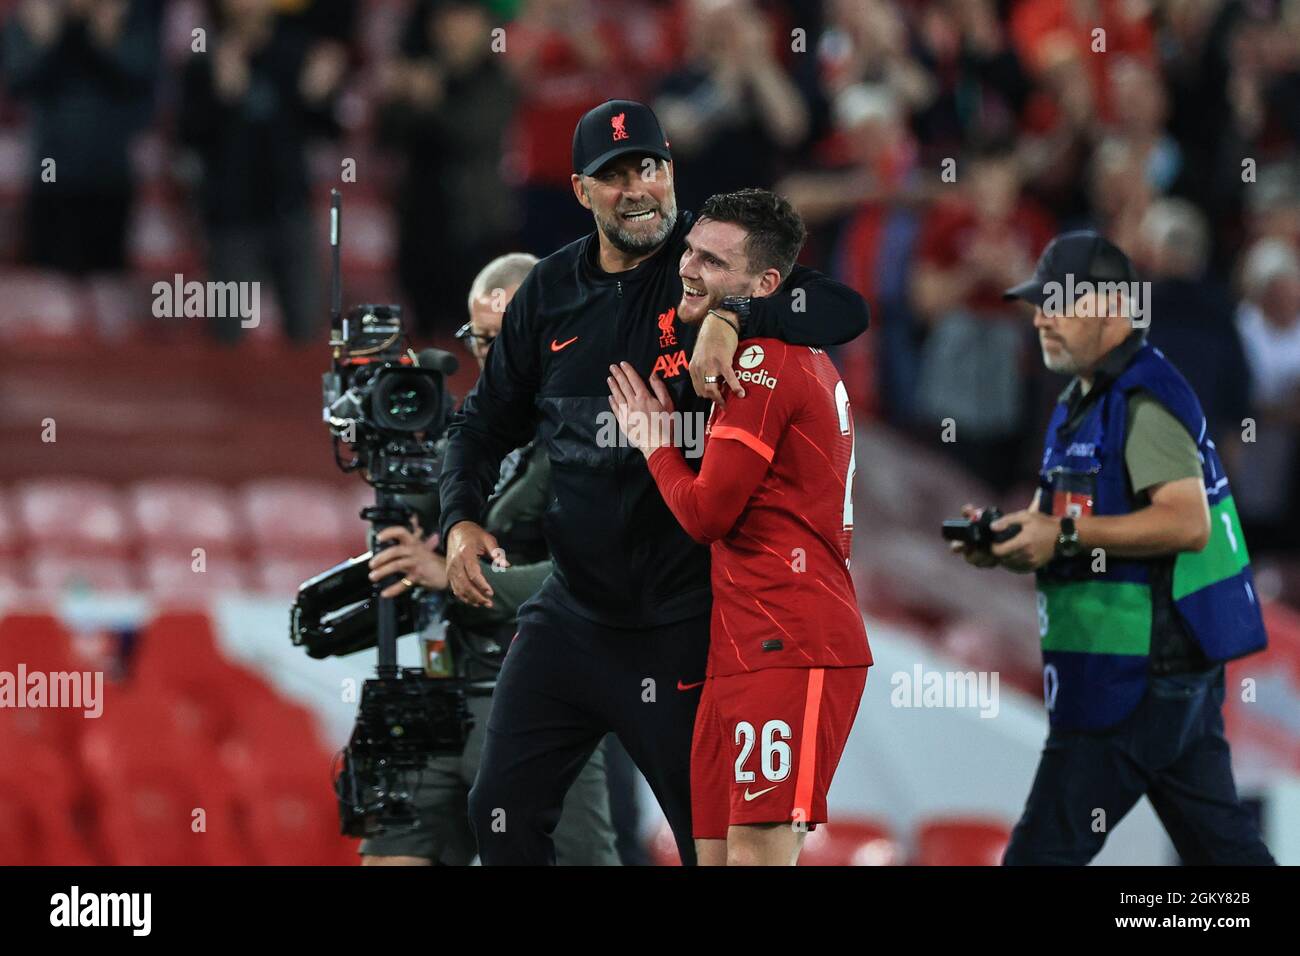 Jürgen Klopp manager of Liverpool embraces Andrew Robertson #26 of Liverpool after Liverpool beat AC Milan 3-2 Stock Photo